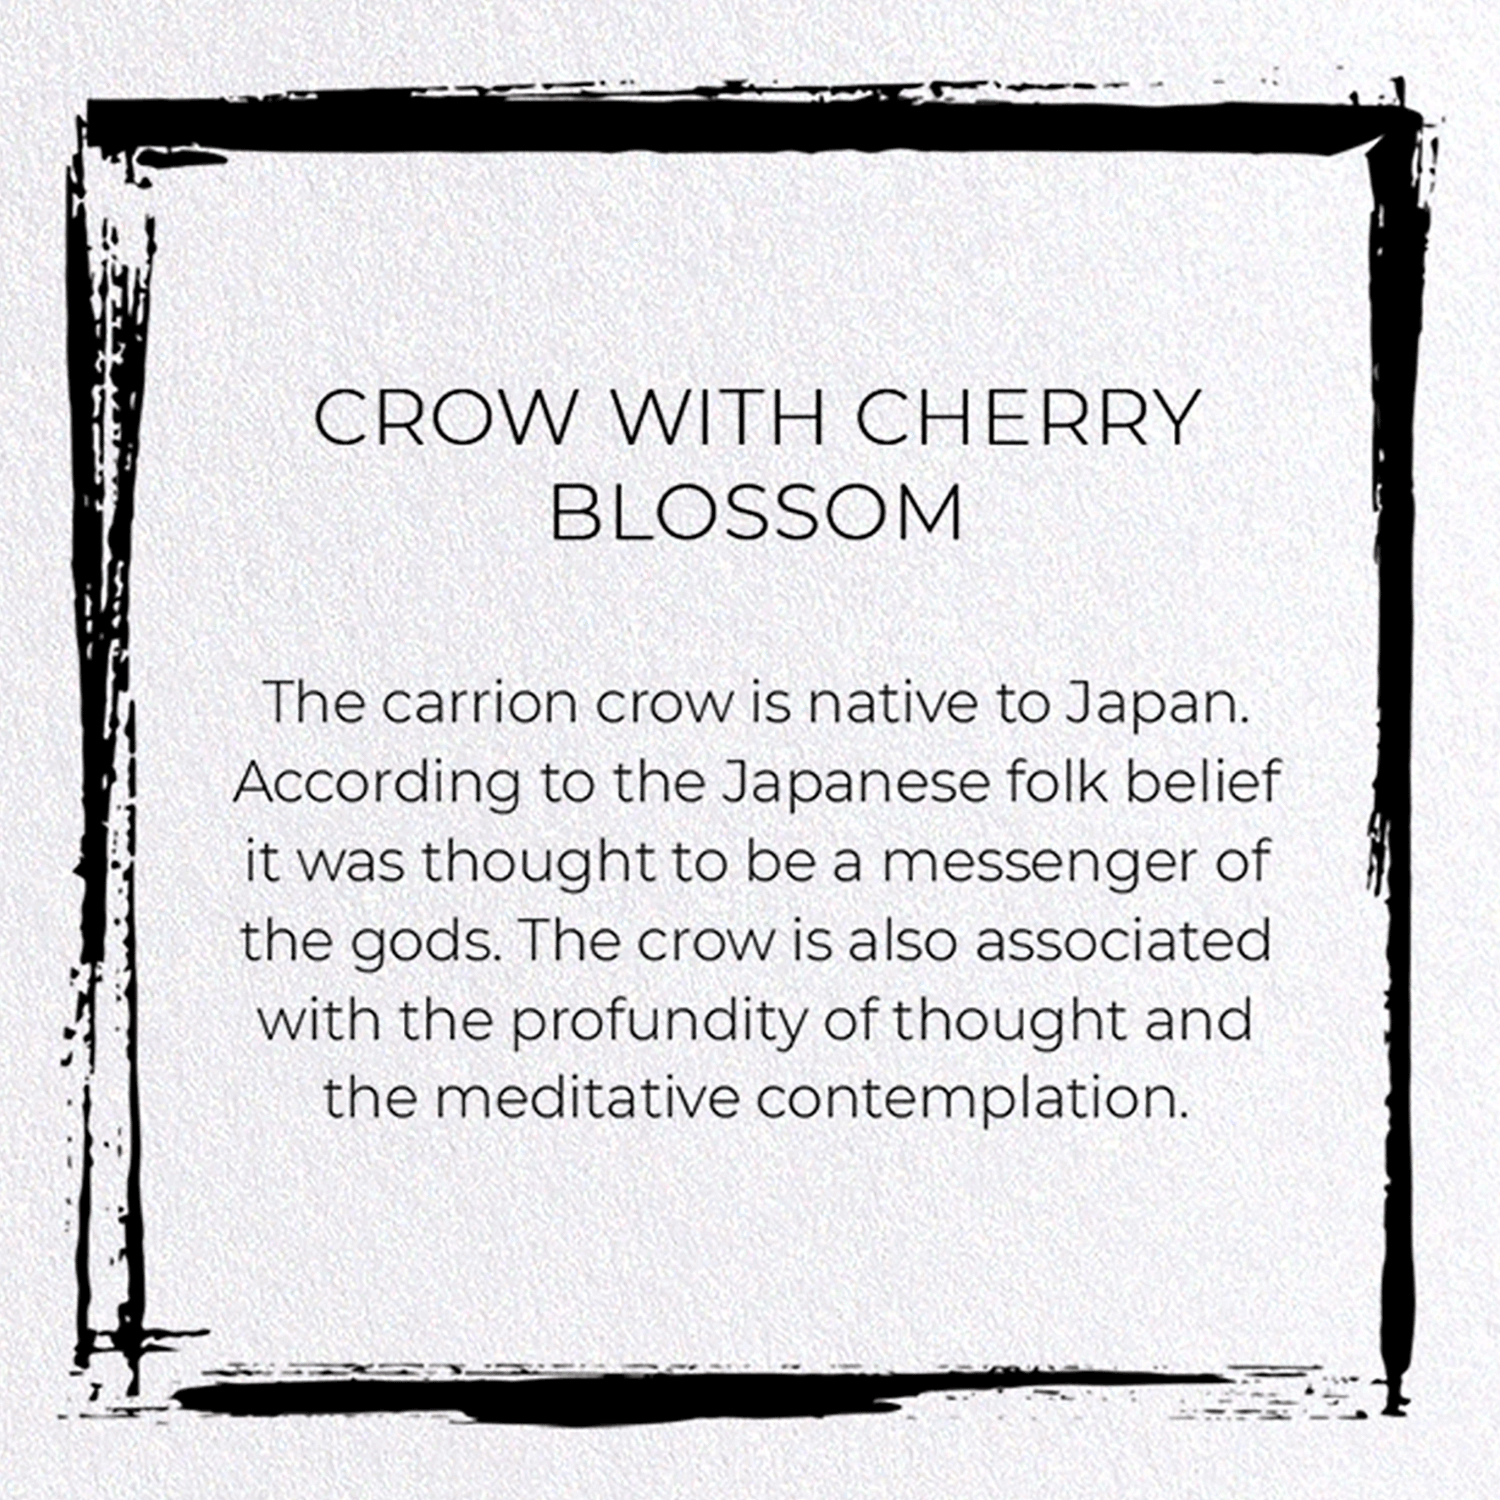 CROW WITH CHERRY BLOSSOM